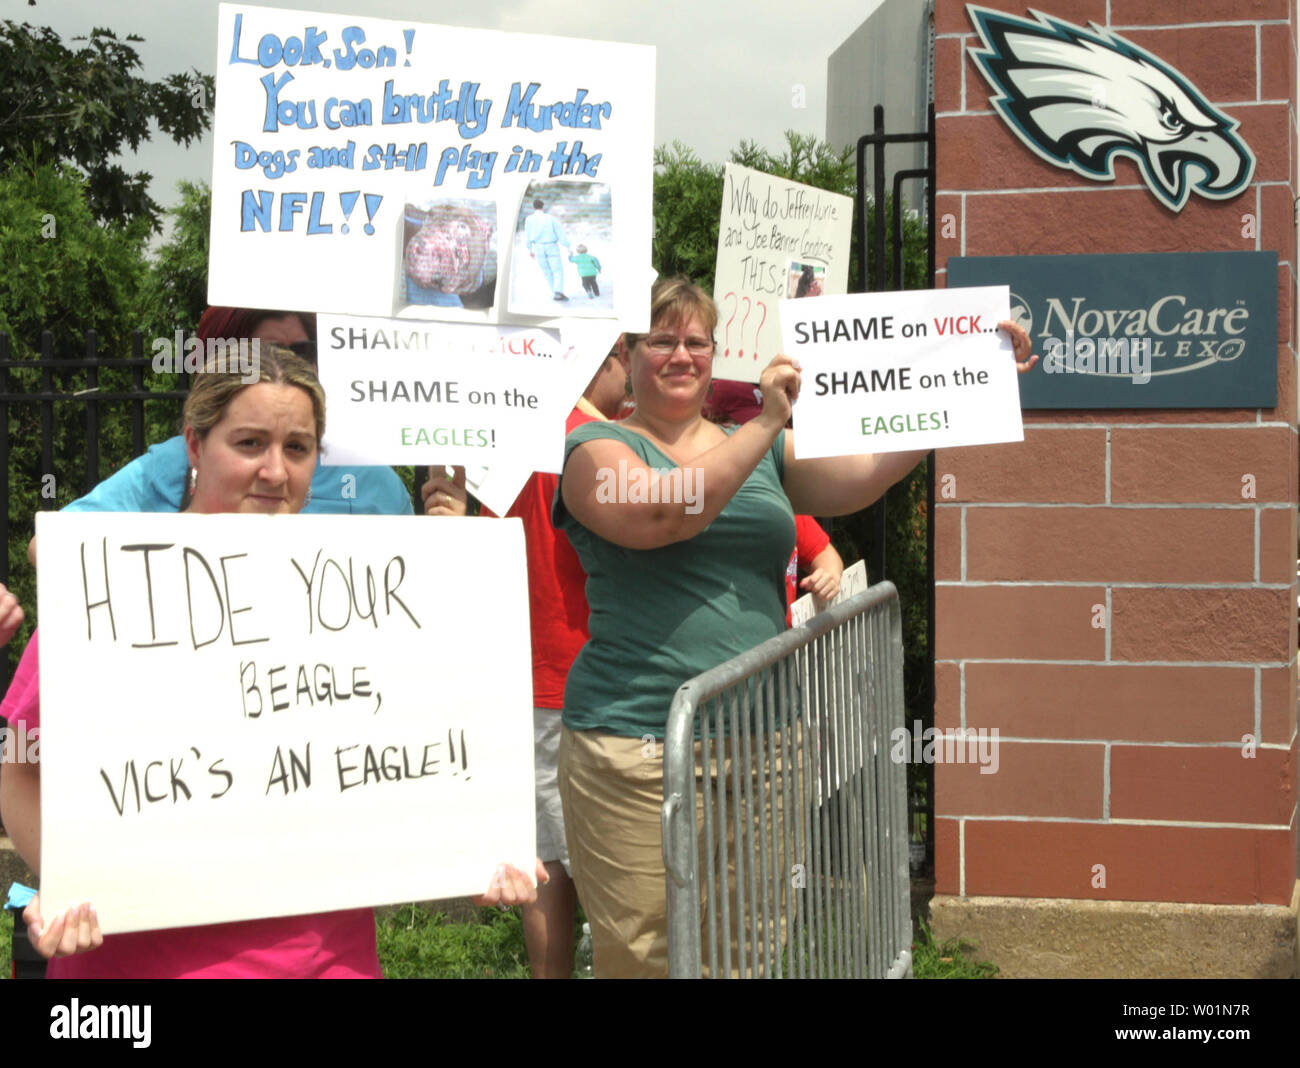 protestors-hold-up-signs-at-the-front-gate-to-the-philadelphia-eagles-novacare-center-friday-august-14-2009-during-a-news-conference-inside-announcing-the-signing-of-quarterback-michael-vick-for-a-16-million-contract-with-the-team-vick-was-the-no1-draft-pick-in-2001-by-the-atlanta-falcons-and-once-the-highest-paid-player-in-football-but-was-convicted-of-running-a-dog-fighting-operation-and-has-just-recently-released-from-federal-prison-upijohn-anderson-W01N7R.jpg